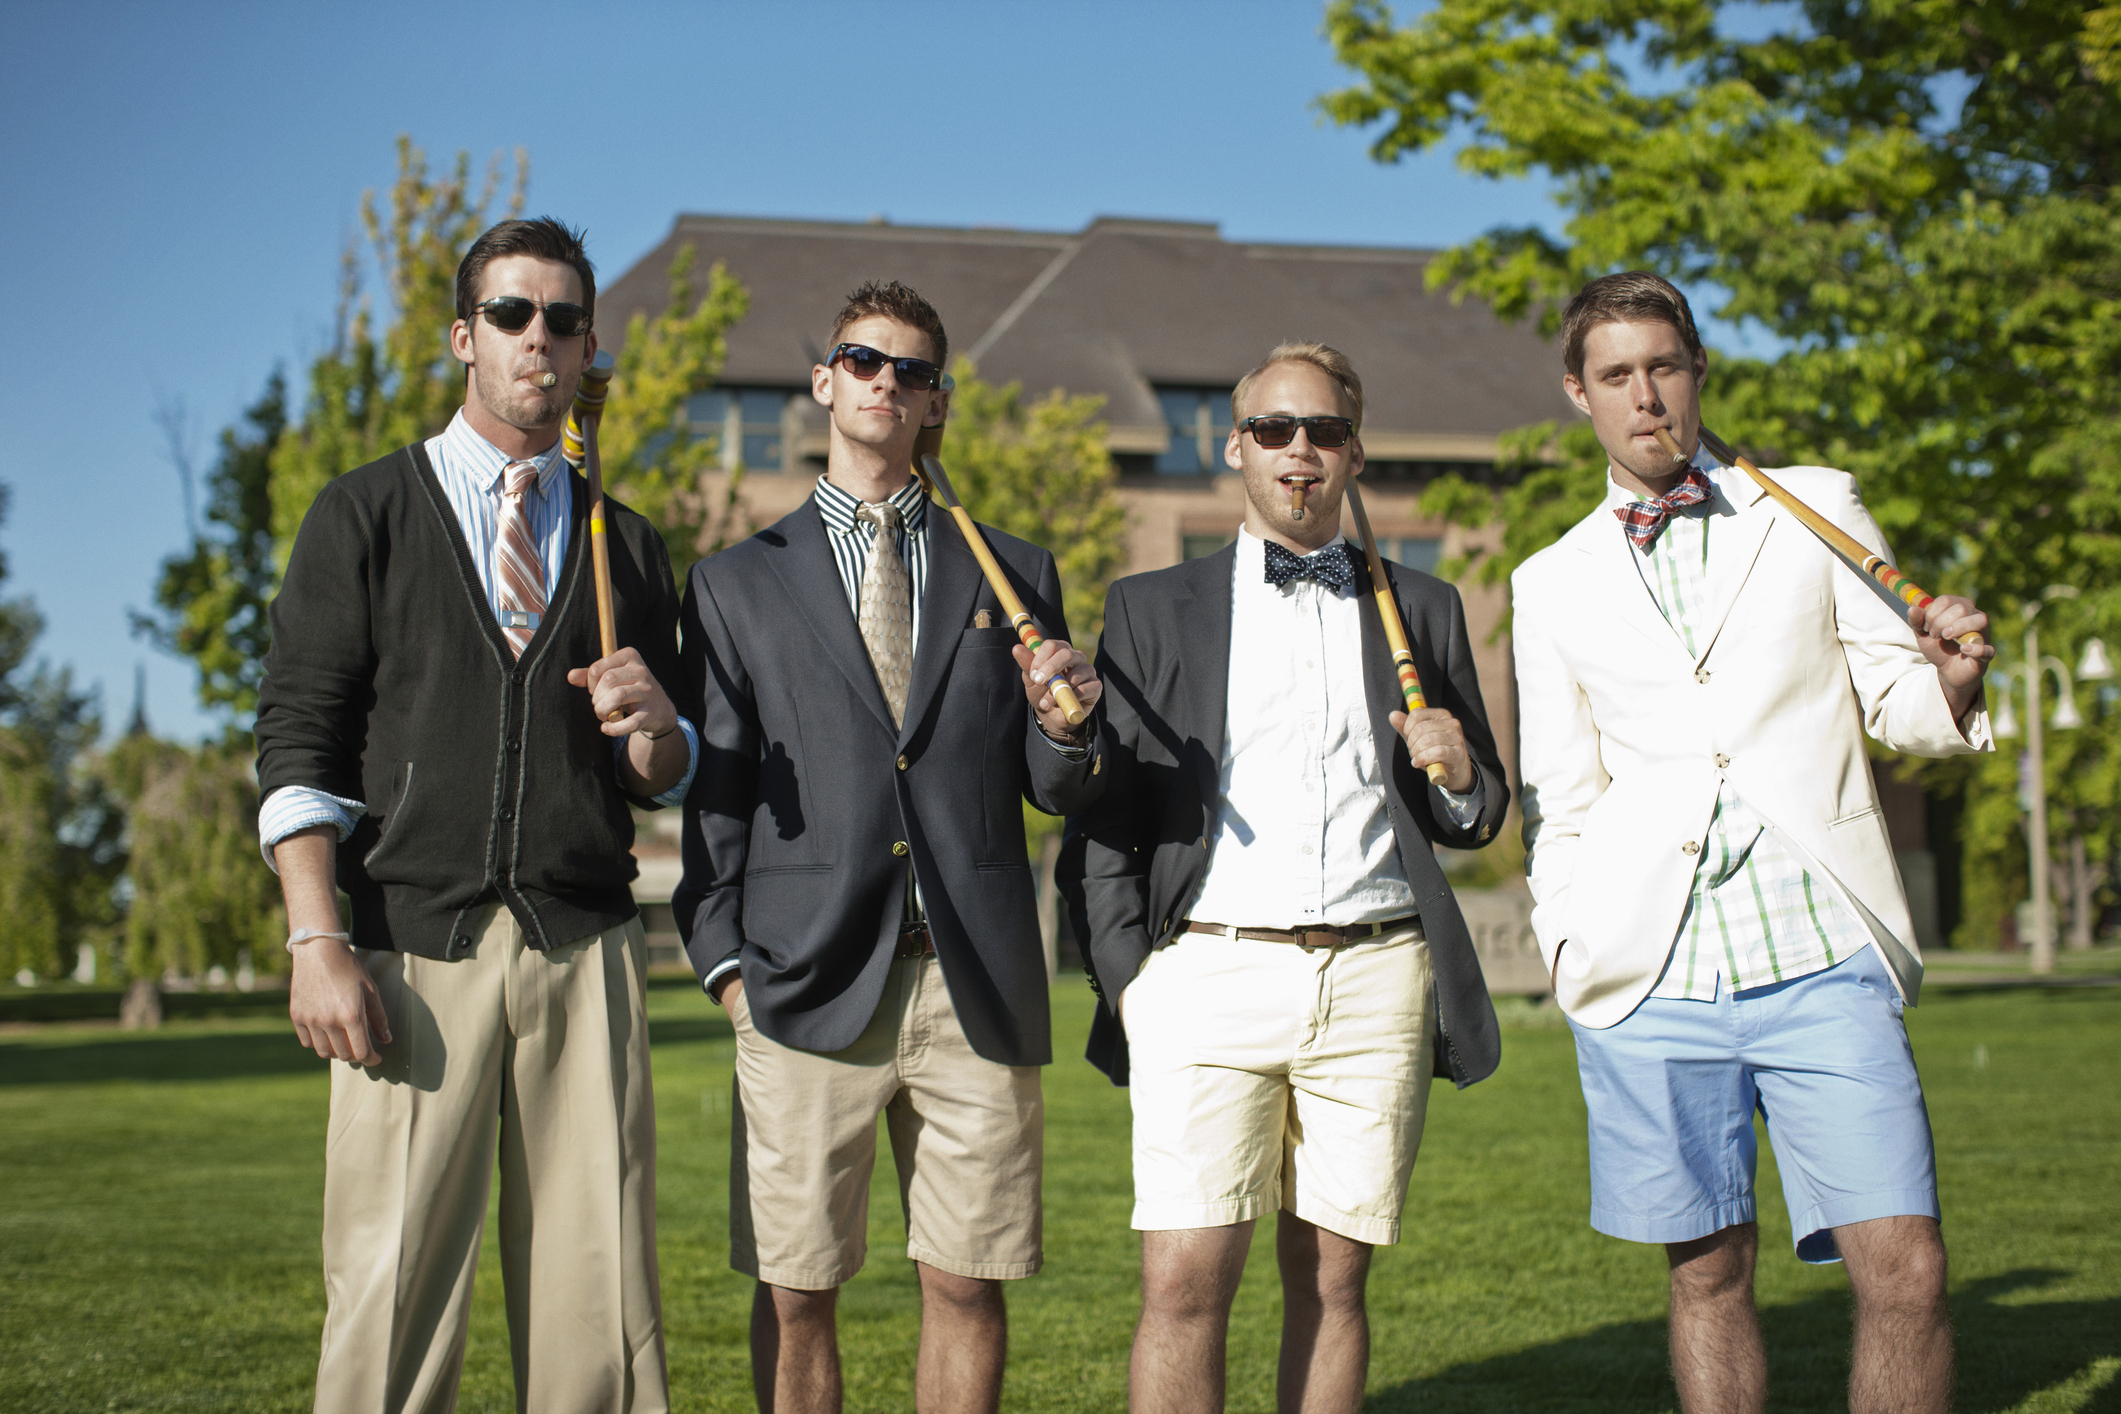 Wealthy-looking young men in blazers and holding croquet mallets